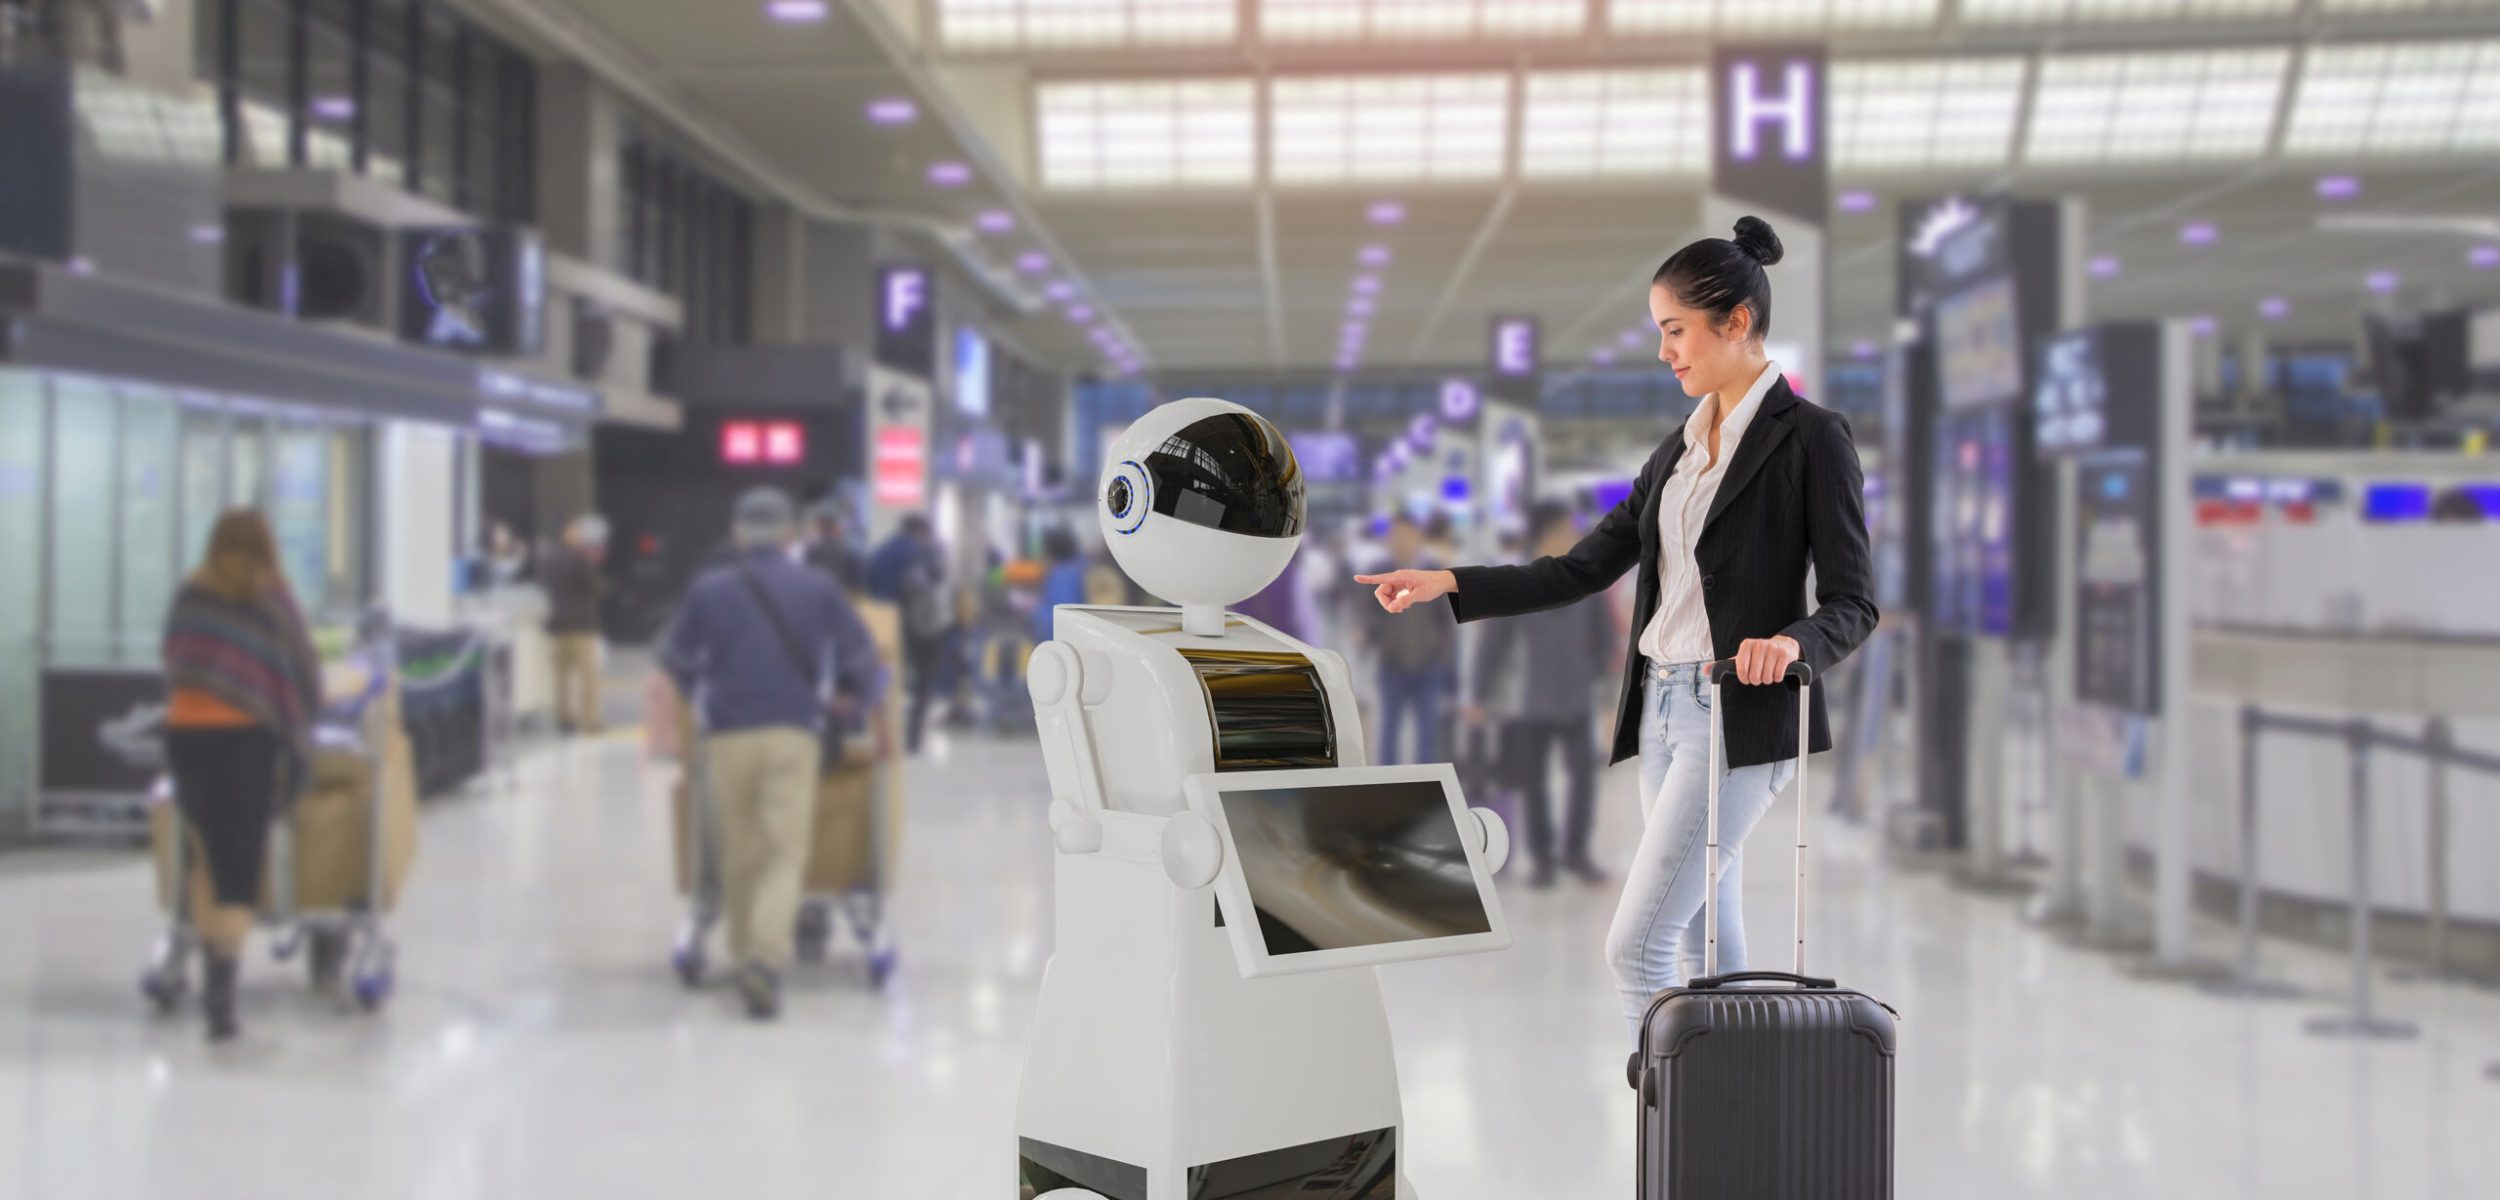 The,Robots,Are,Responsible,For,Checking,Flights,To,Female,Tourists